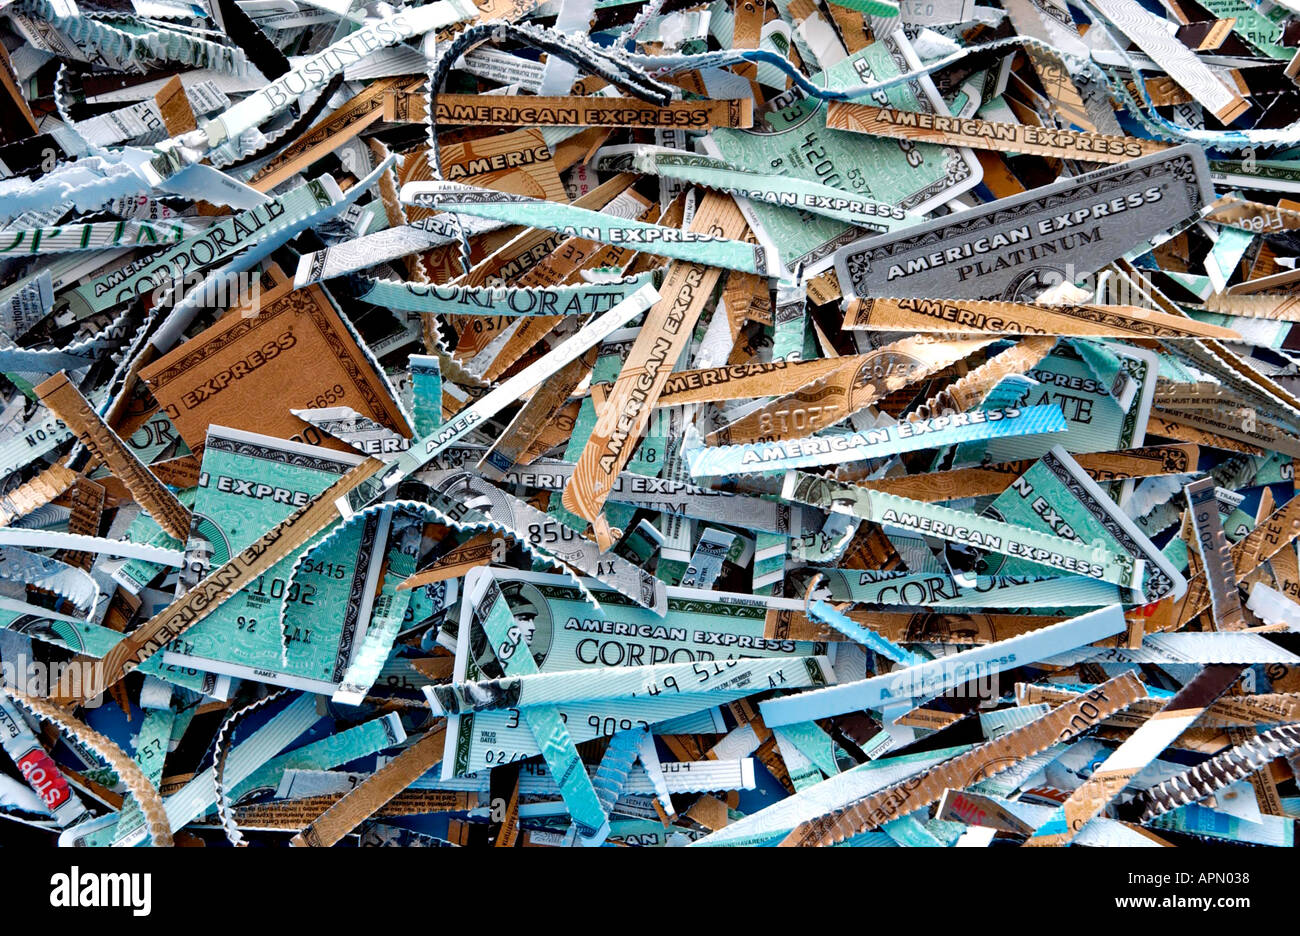 Redundant shredded American Express plastic credit cards in a waste bin Stock Photo